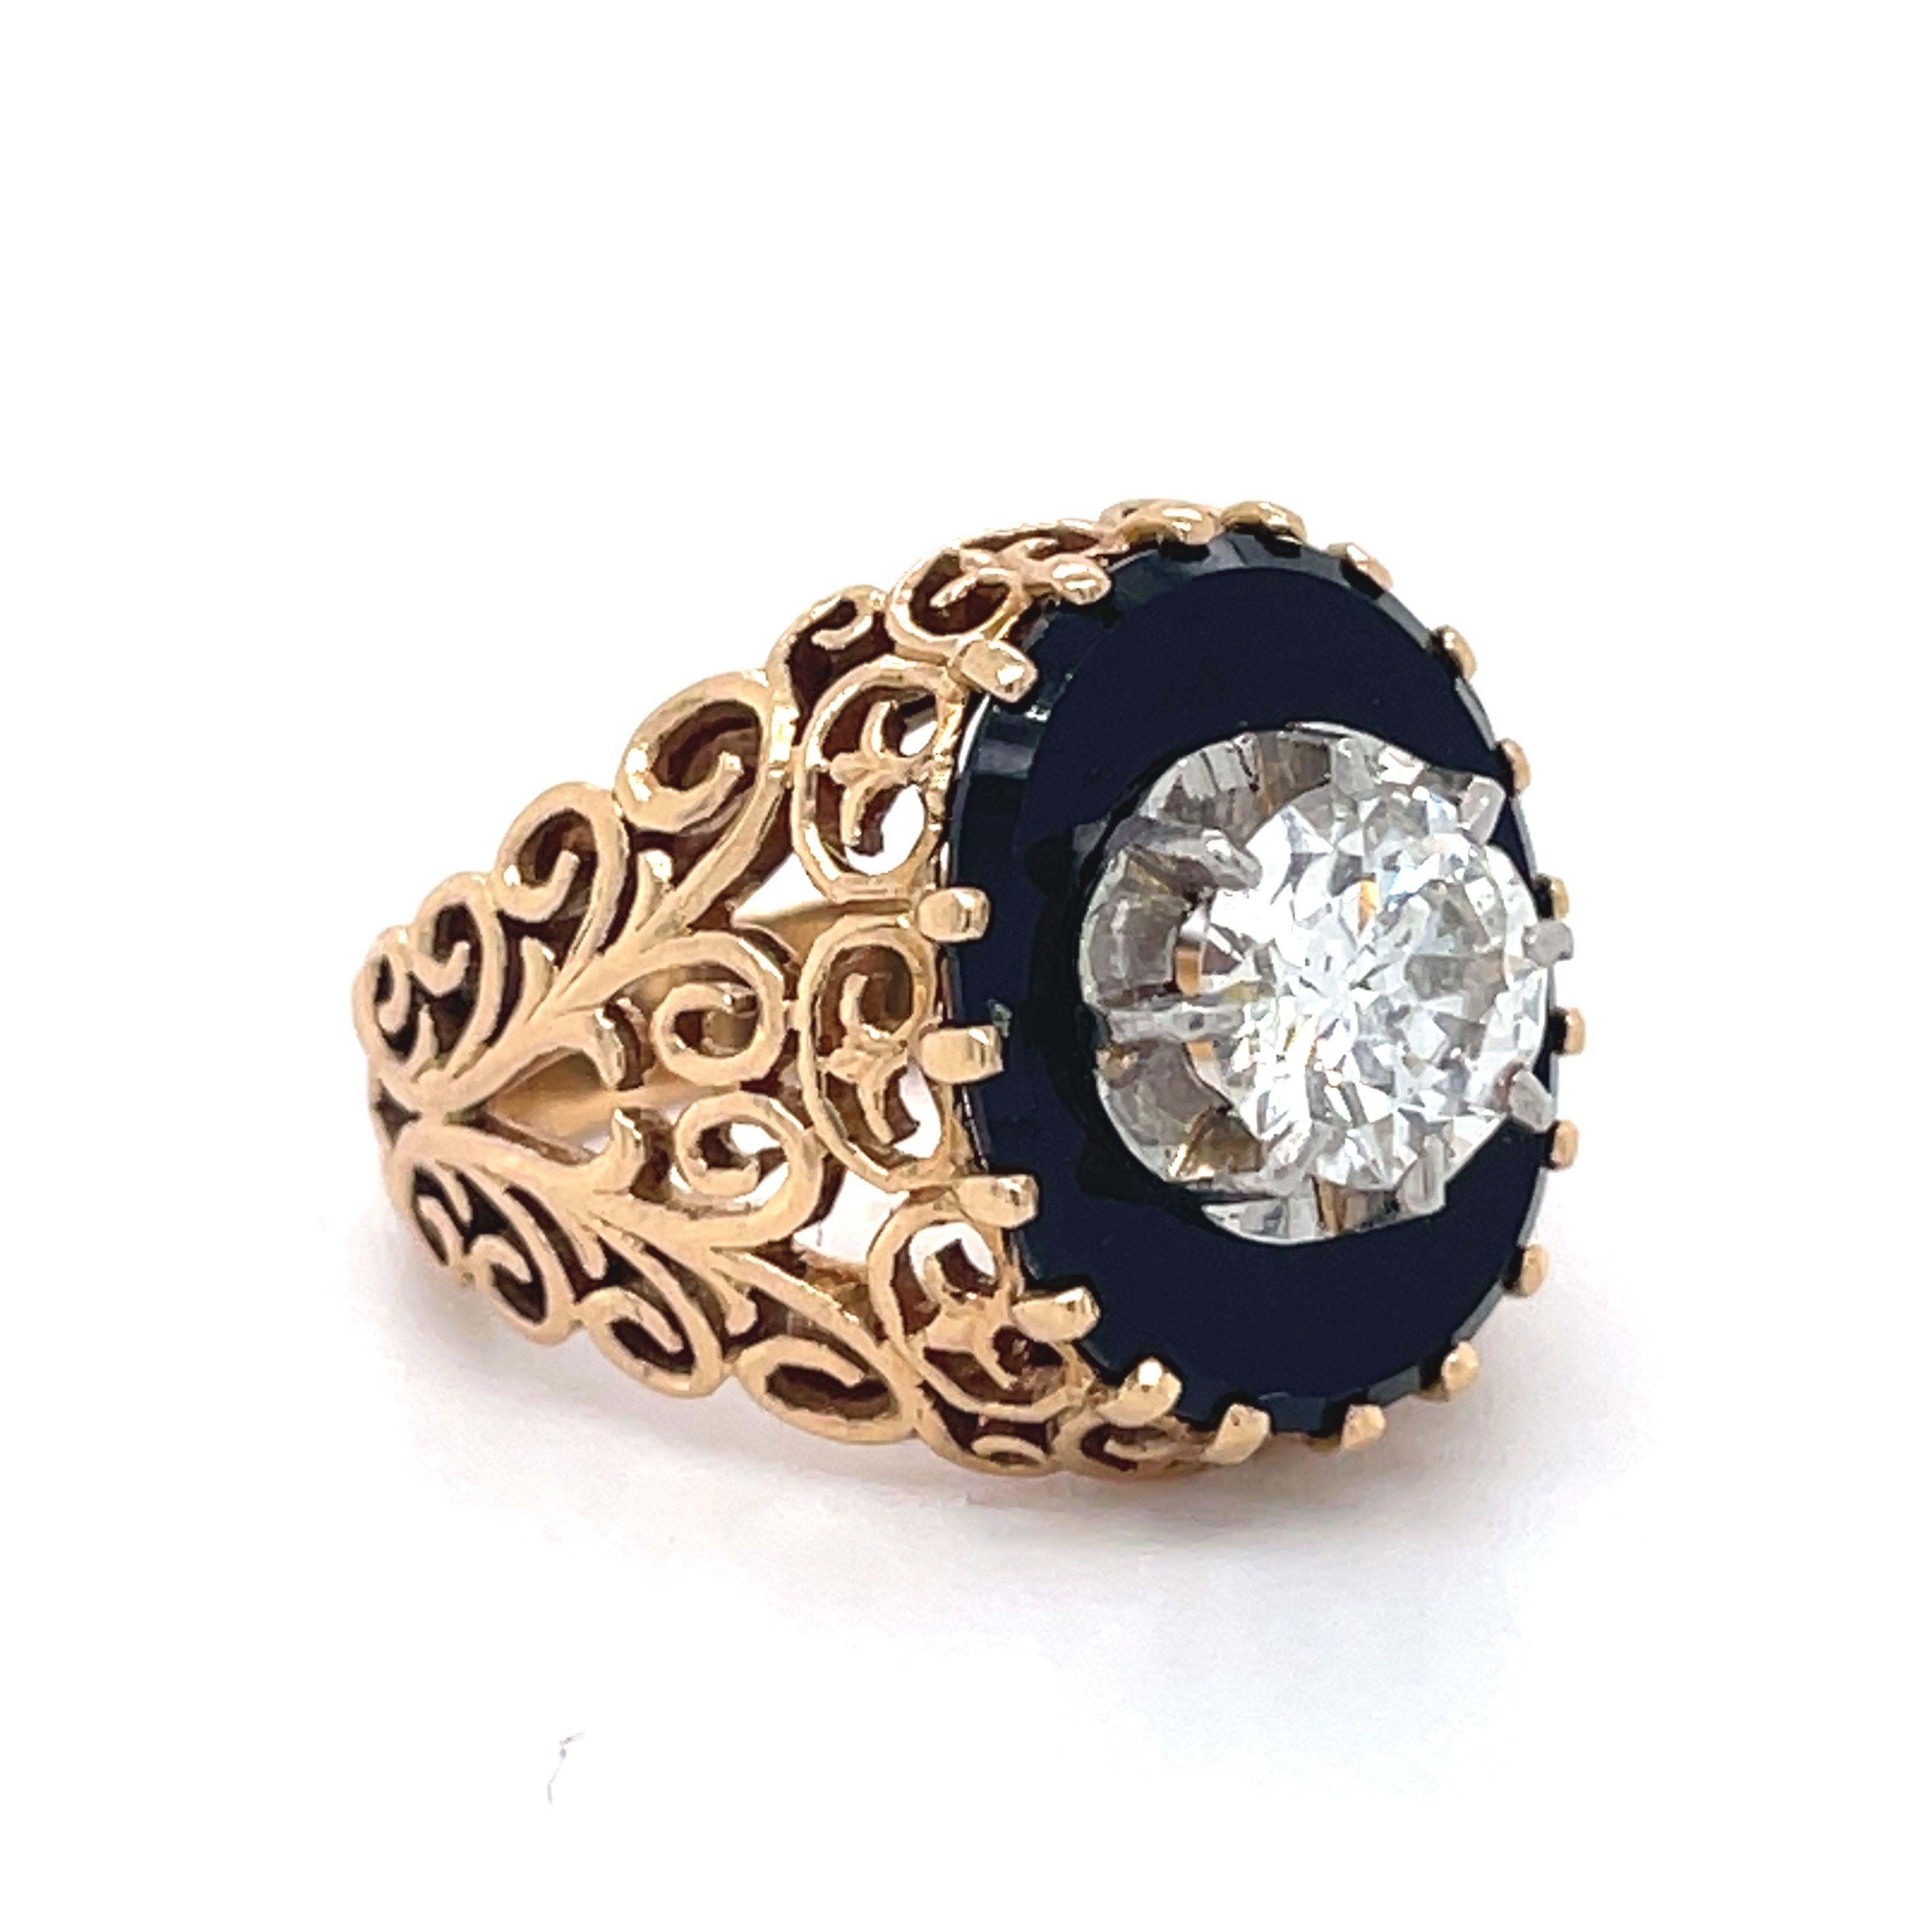 Filigree Ring- Vintage Onyx and Diamond Ring, 1ct Round Diamond, 18k Yellow Gold For Sale 1